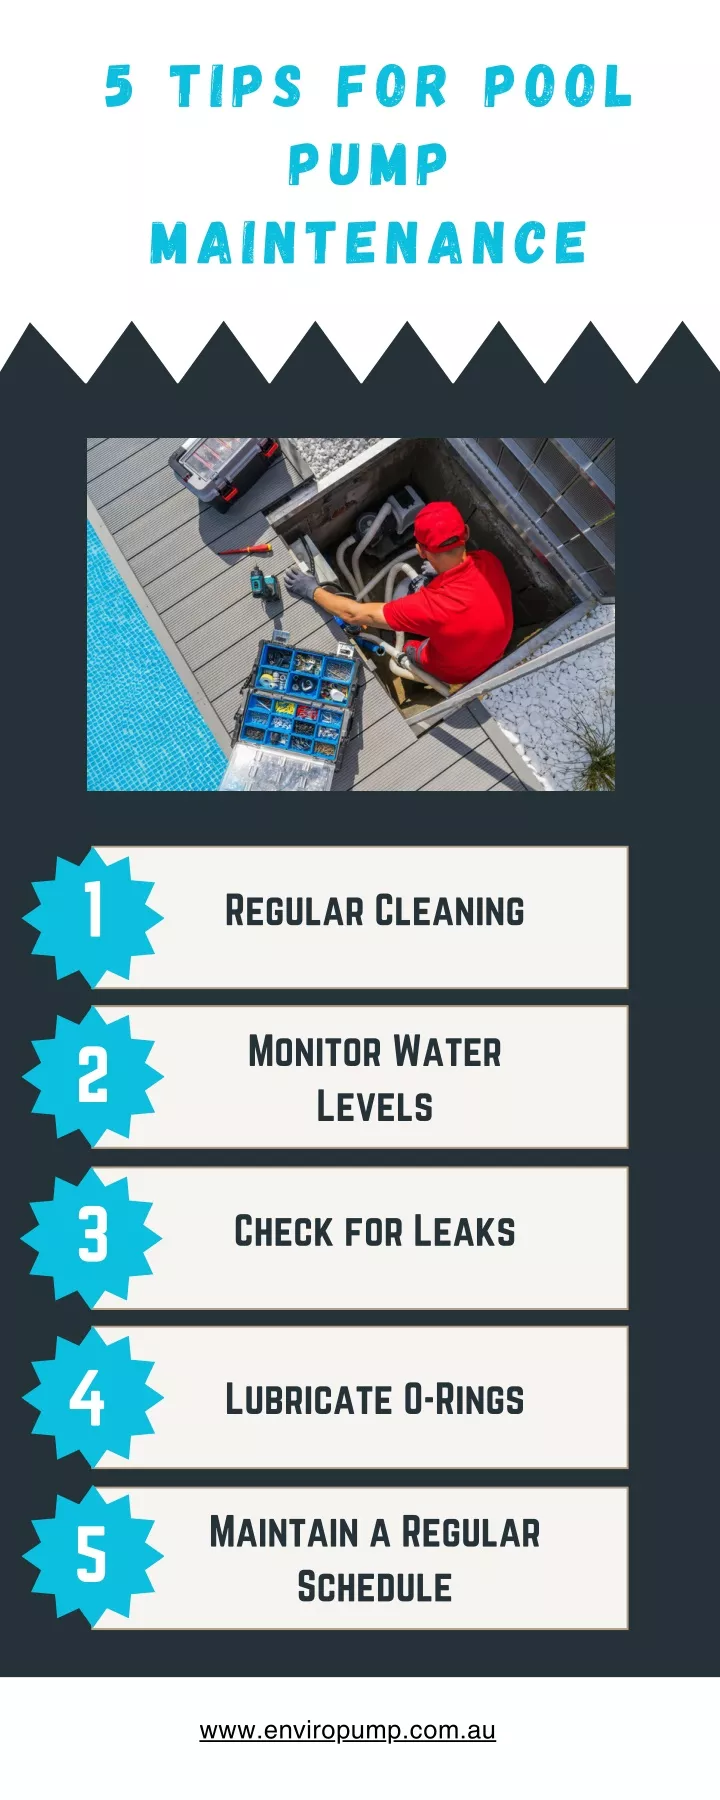 5 tips for pool pump maintenance